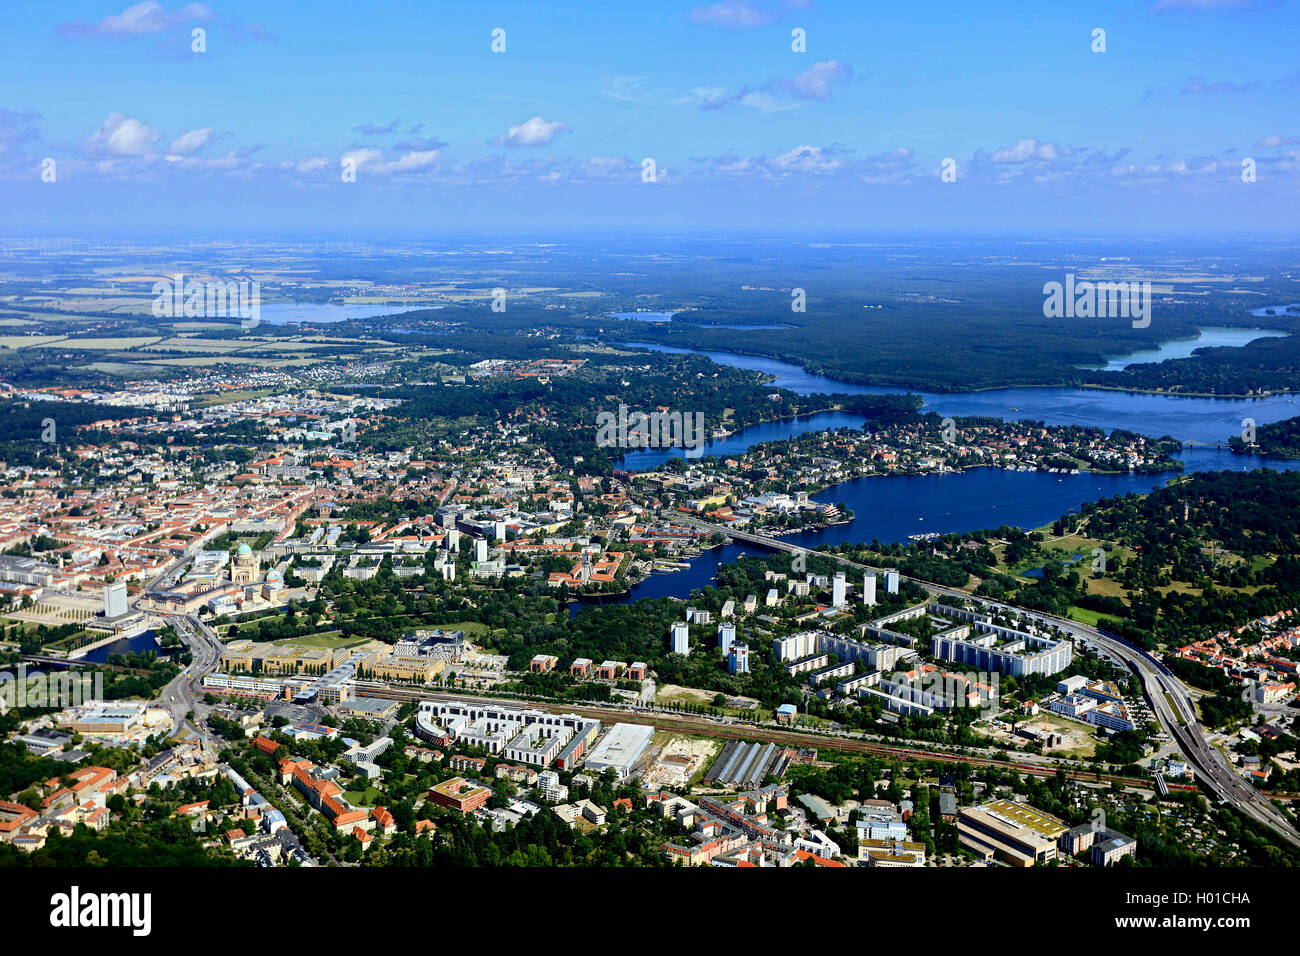 view on Potsdam with the lakes Tiefer See, Heiliger See and Jungfernsee, 20.06.2016, aerial view, Germany, Brandenburg, Potsdam Stock Photo